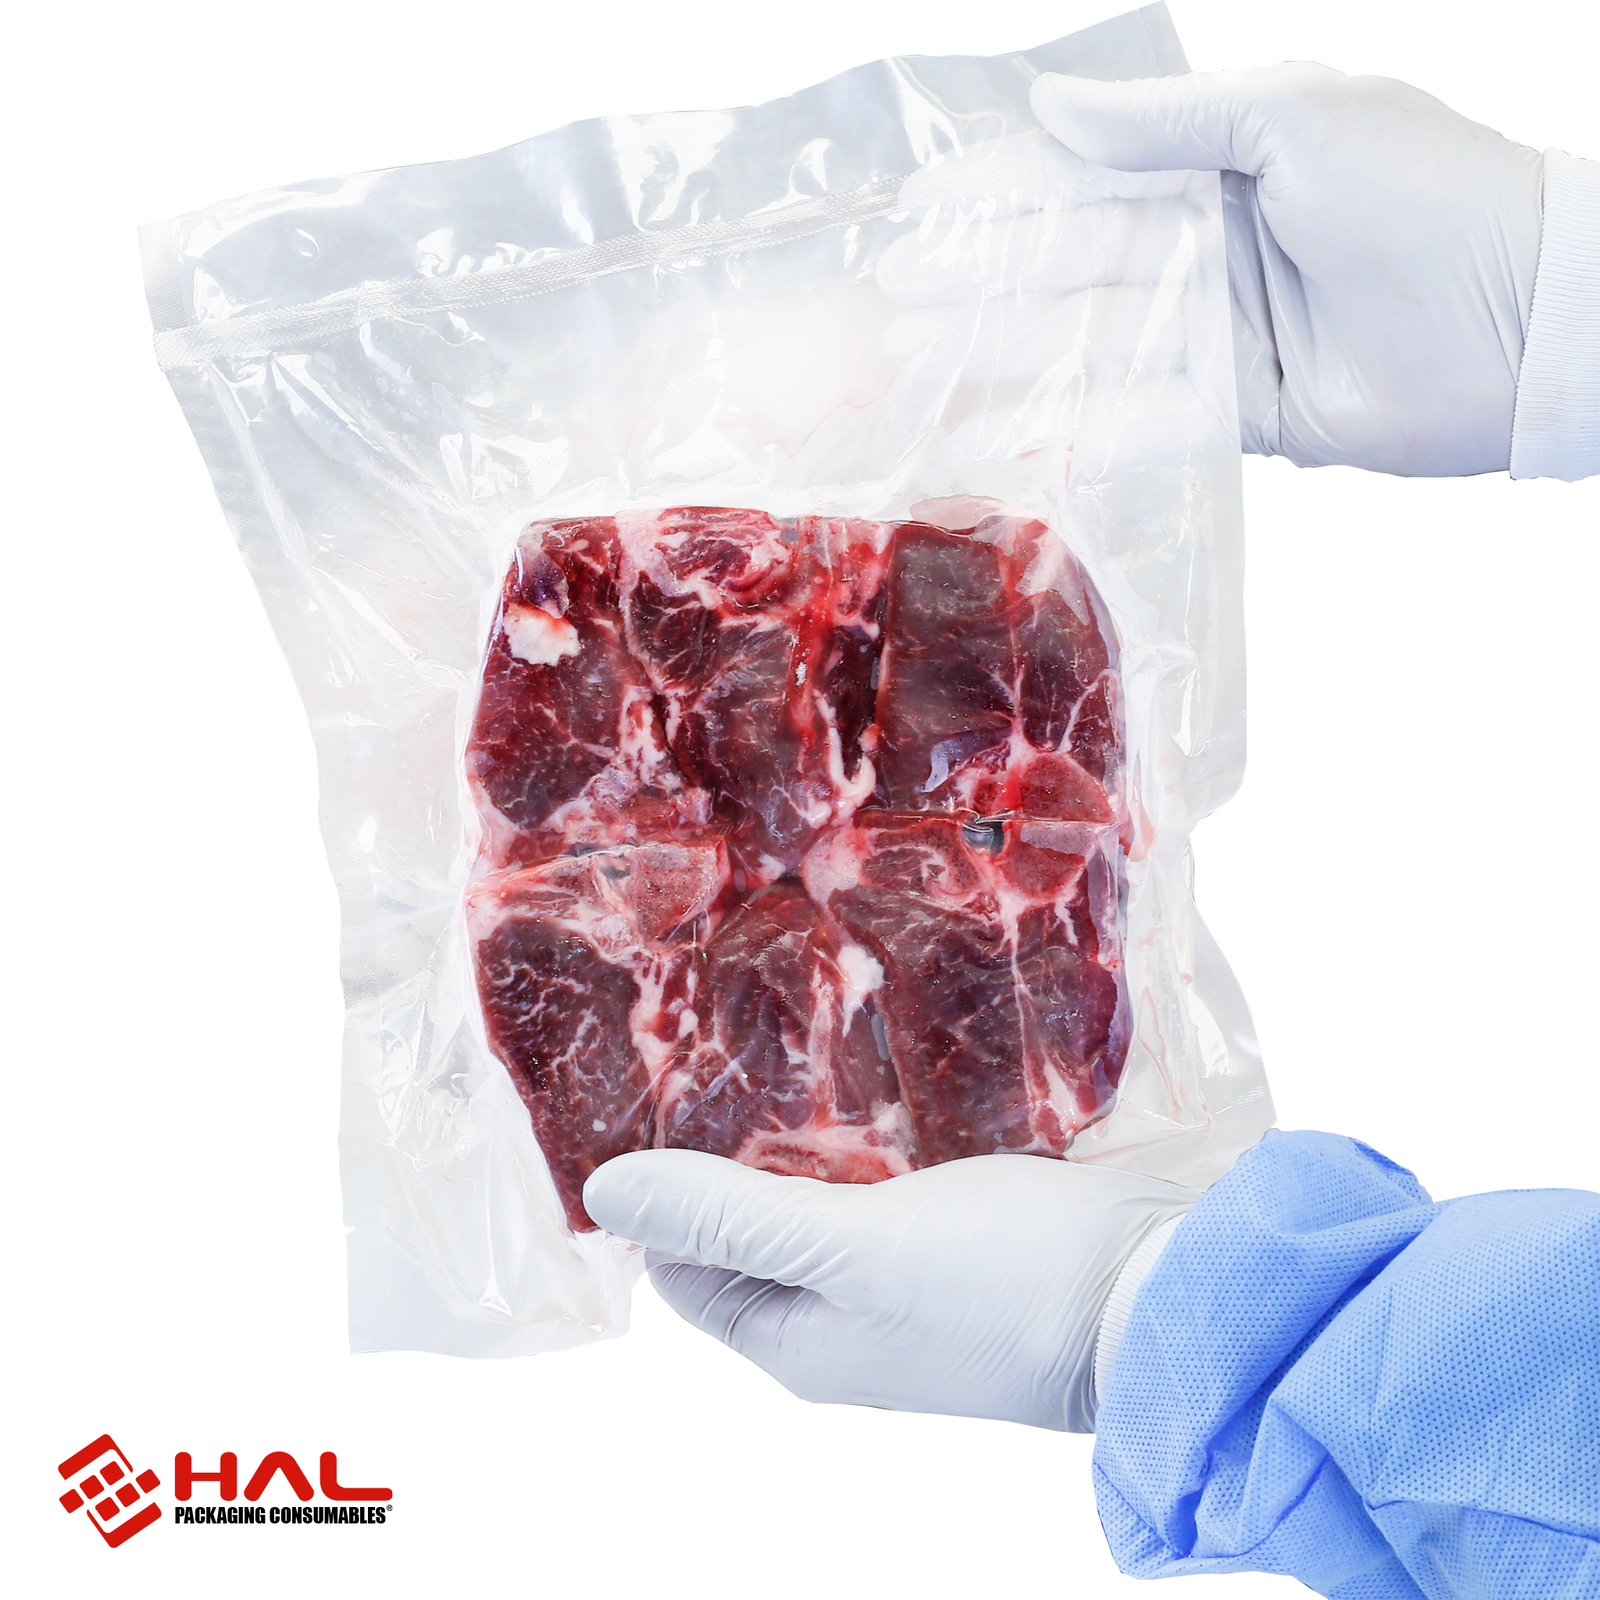 Hands of a person holding a vacuumed sealed bag with a large piece of raw meet inside. Vacuum pouch was sealed and vacuumed with the JORES TECHNOLOGIES® dual seal vacuum sealer